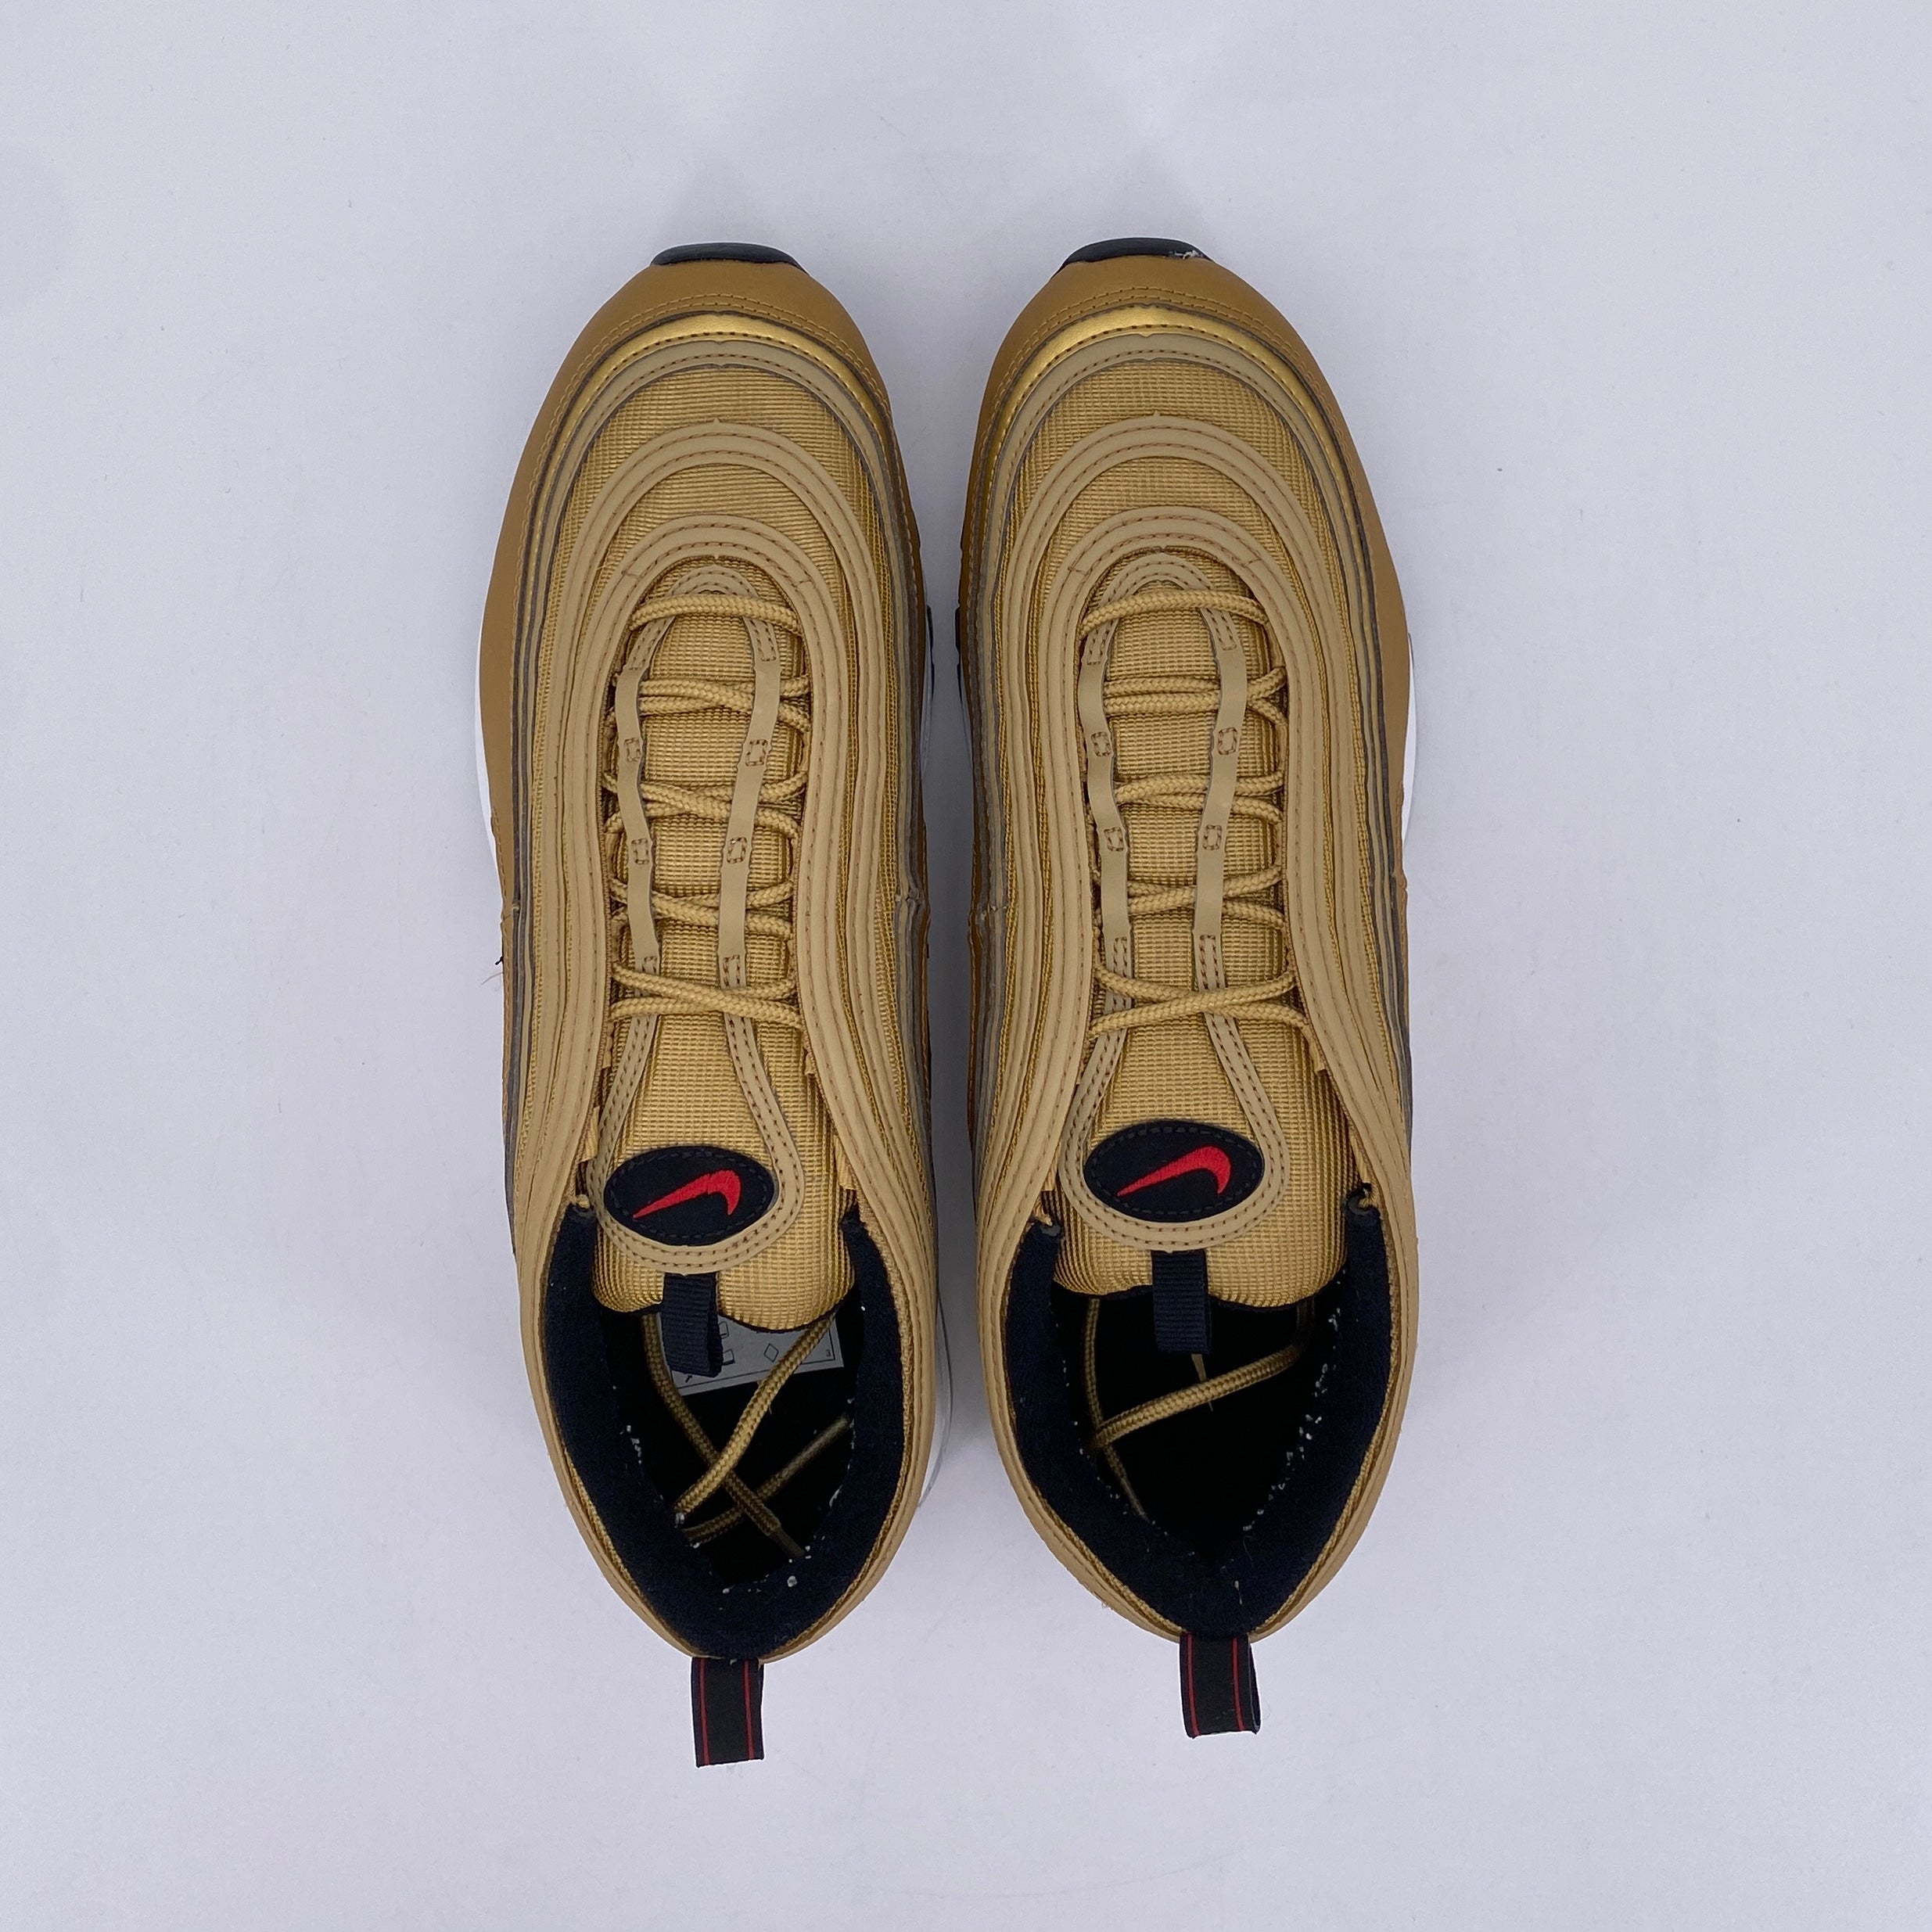 Nike Air Max 97 "Golden Bullet" 2023 Used Size 13